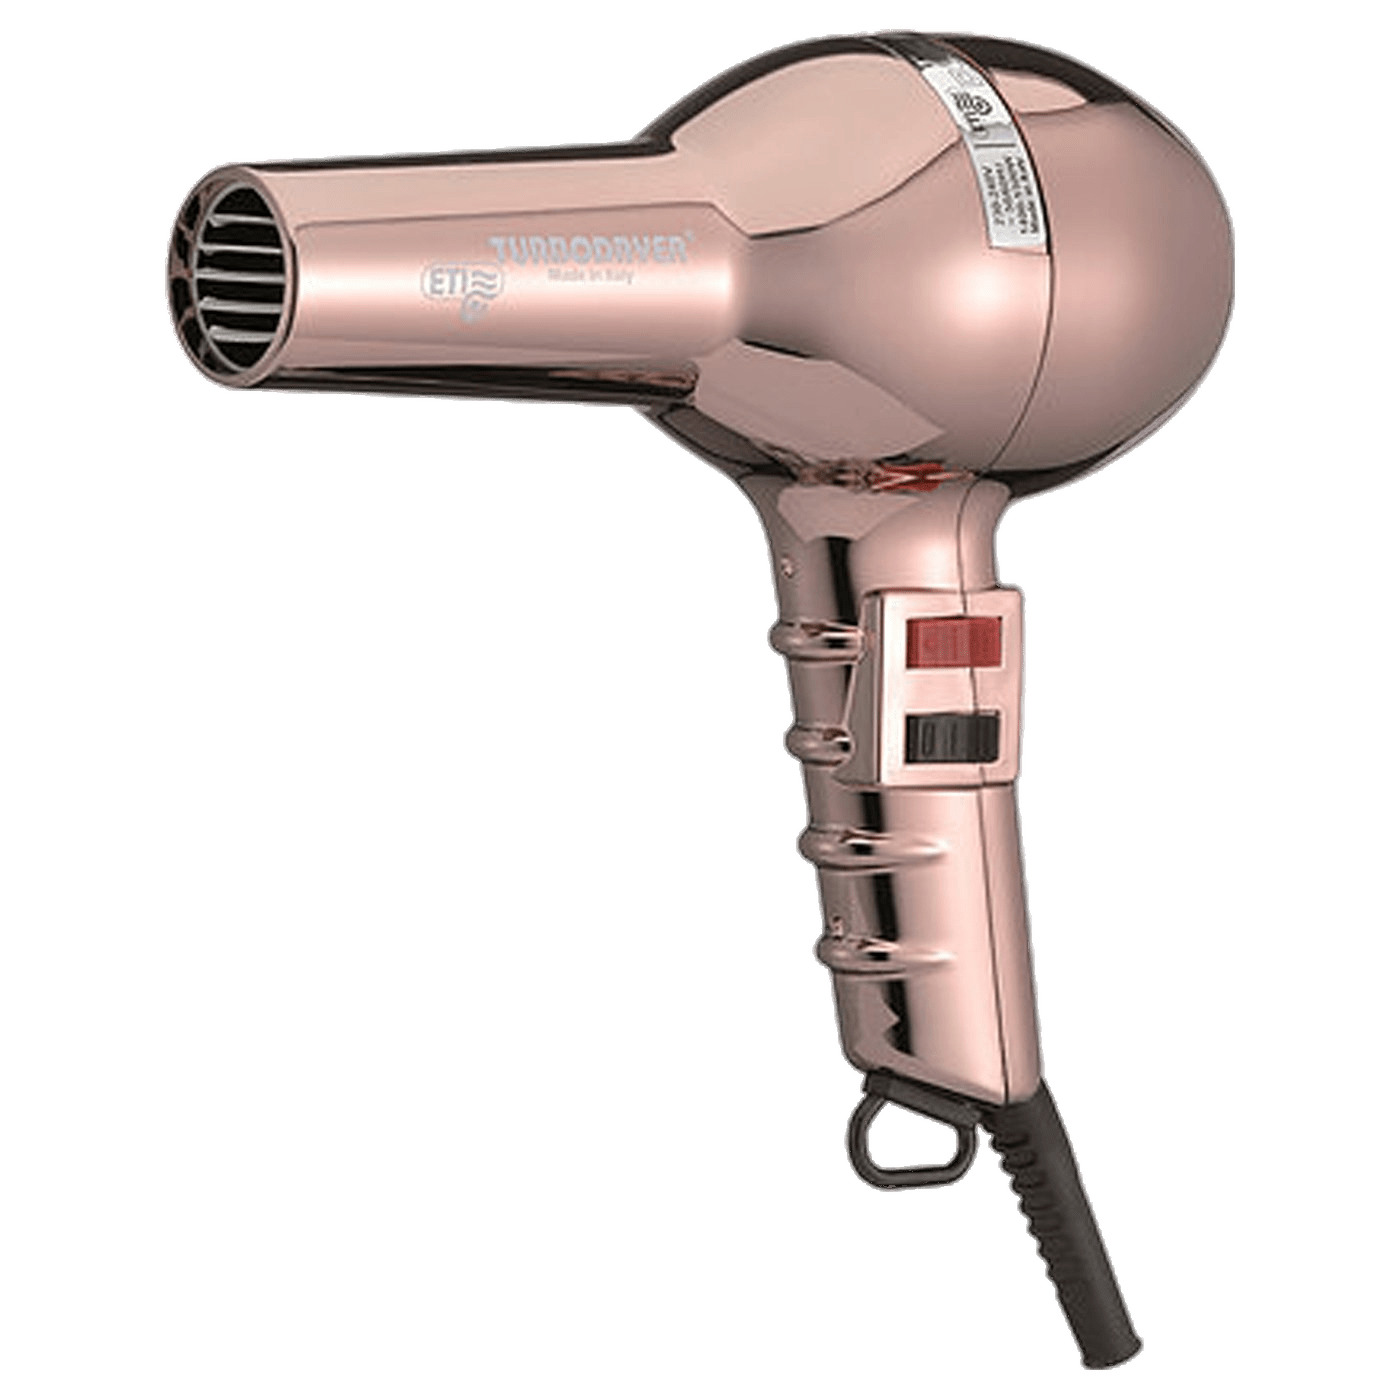 ETI Turbo Hairdryer png icons